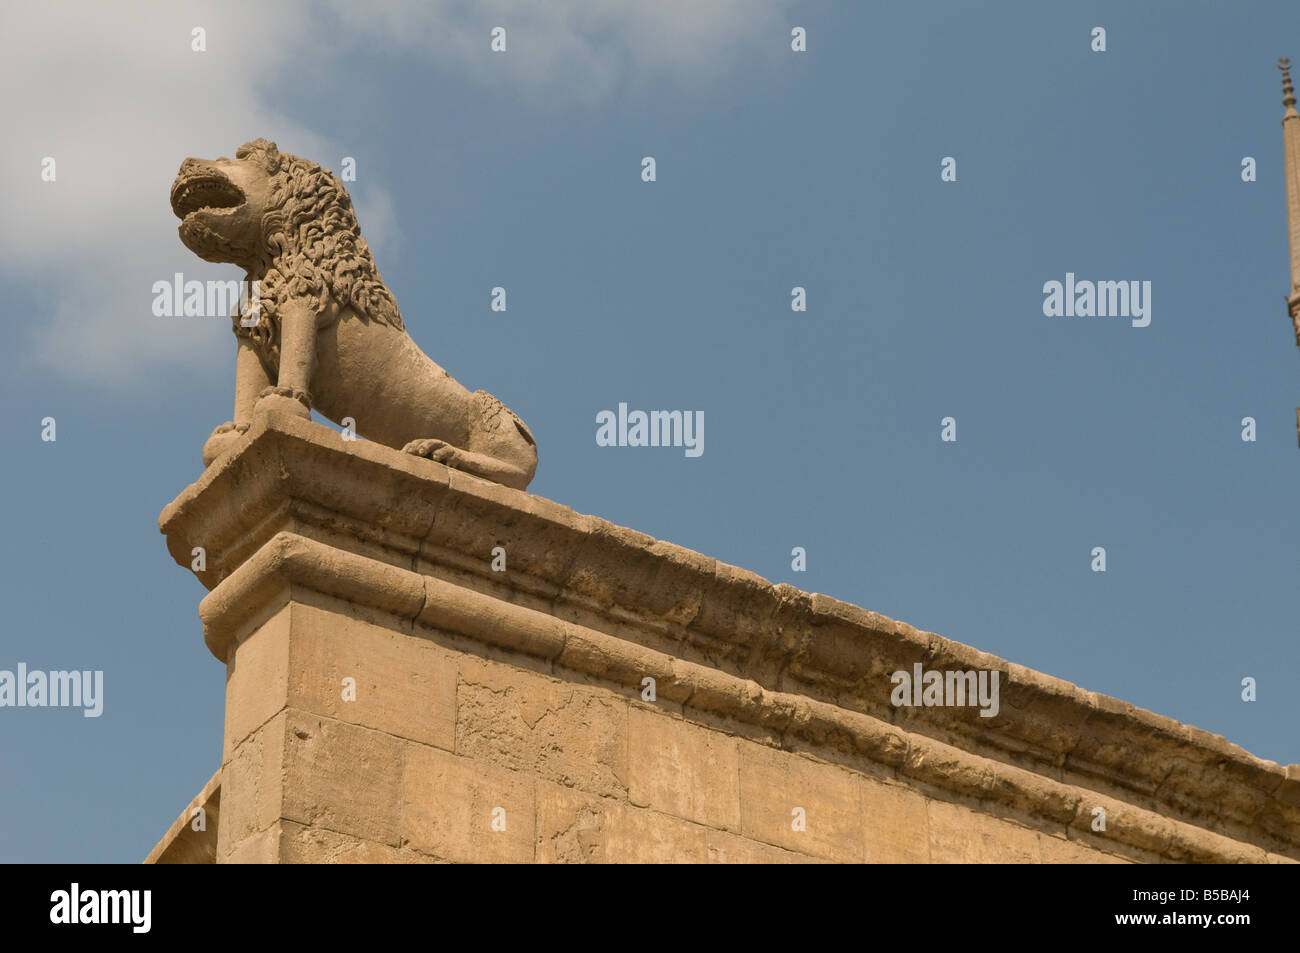 Sculpted lion decorating inner wall at Saladin or Salaḥ ad-Dīn Citadel a medieval Islamic fortification located on Mokattam hill in Cairo, Egypt Stock Photo